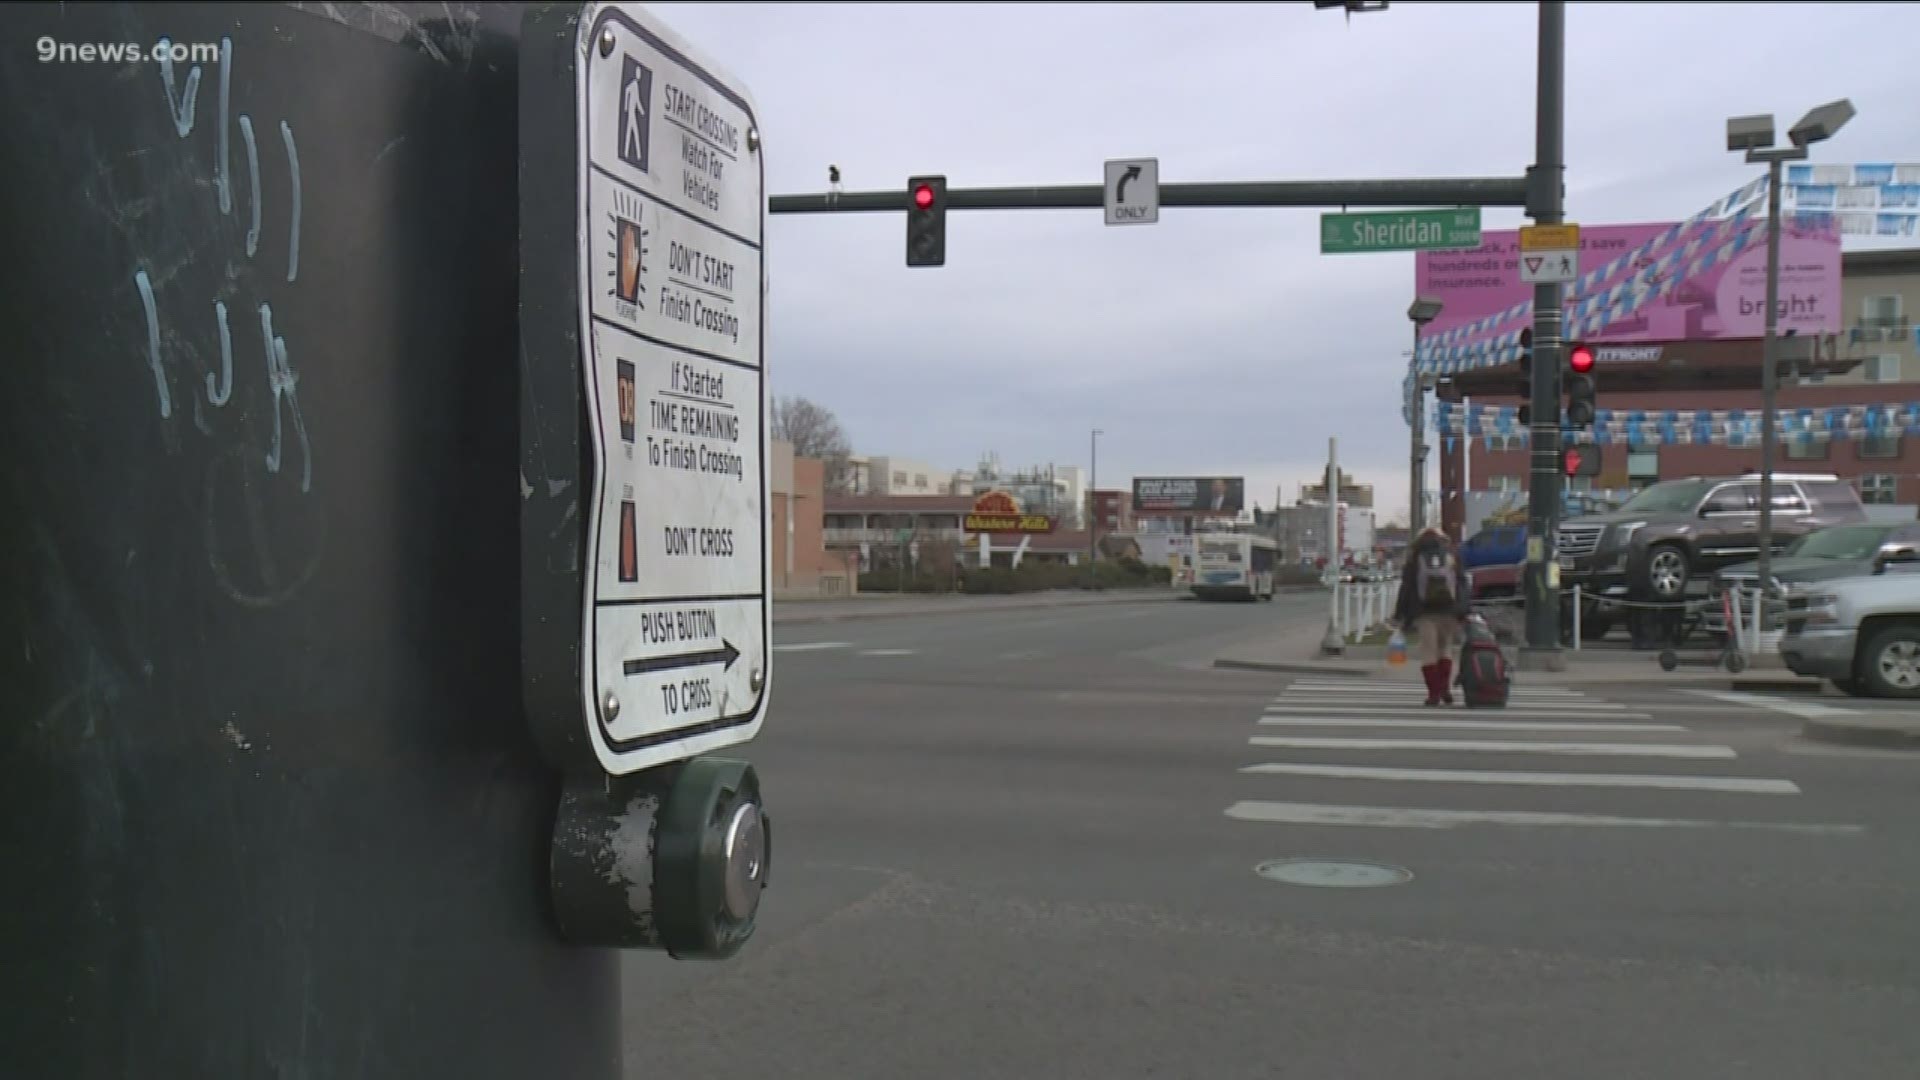 Colfax Avenue is part of the so-called "High Injury Network" in Denver. That means it's one of the 5 percent of streets that make up 50 percent of traffic crashes.